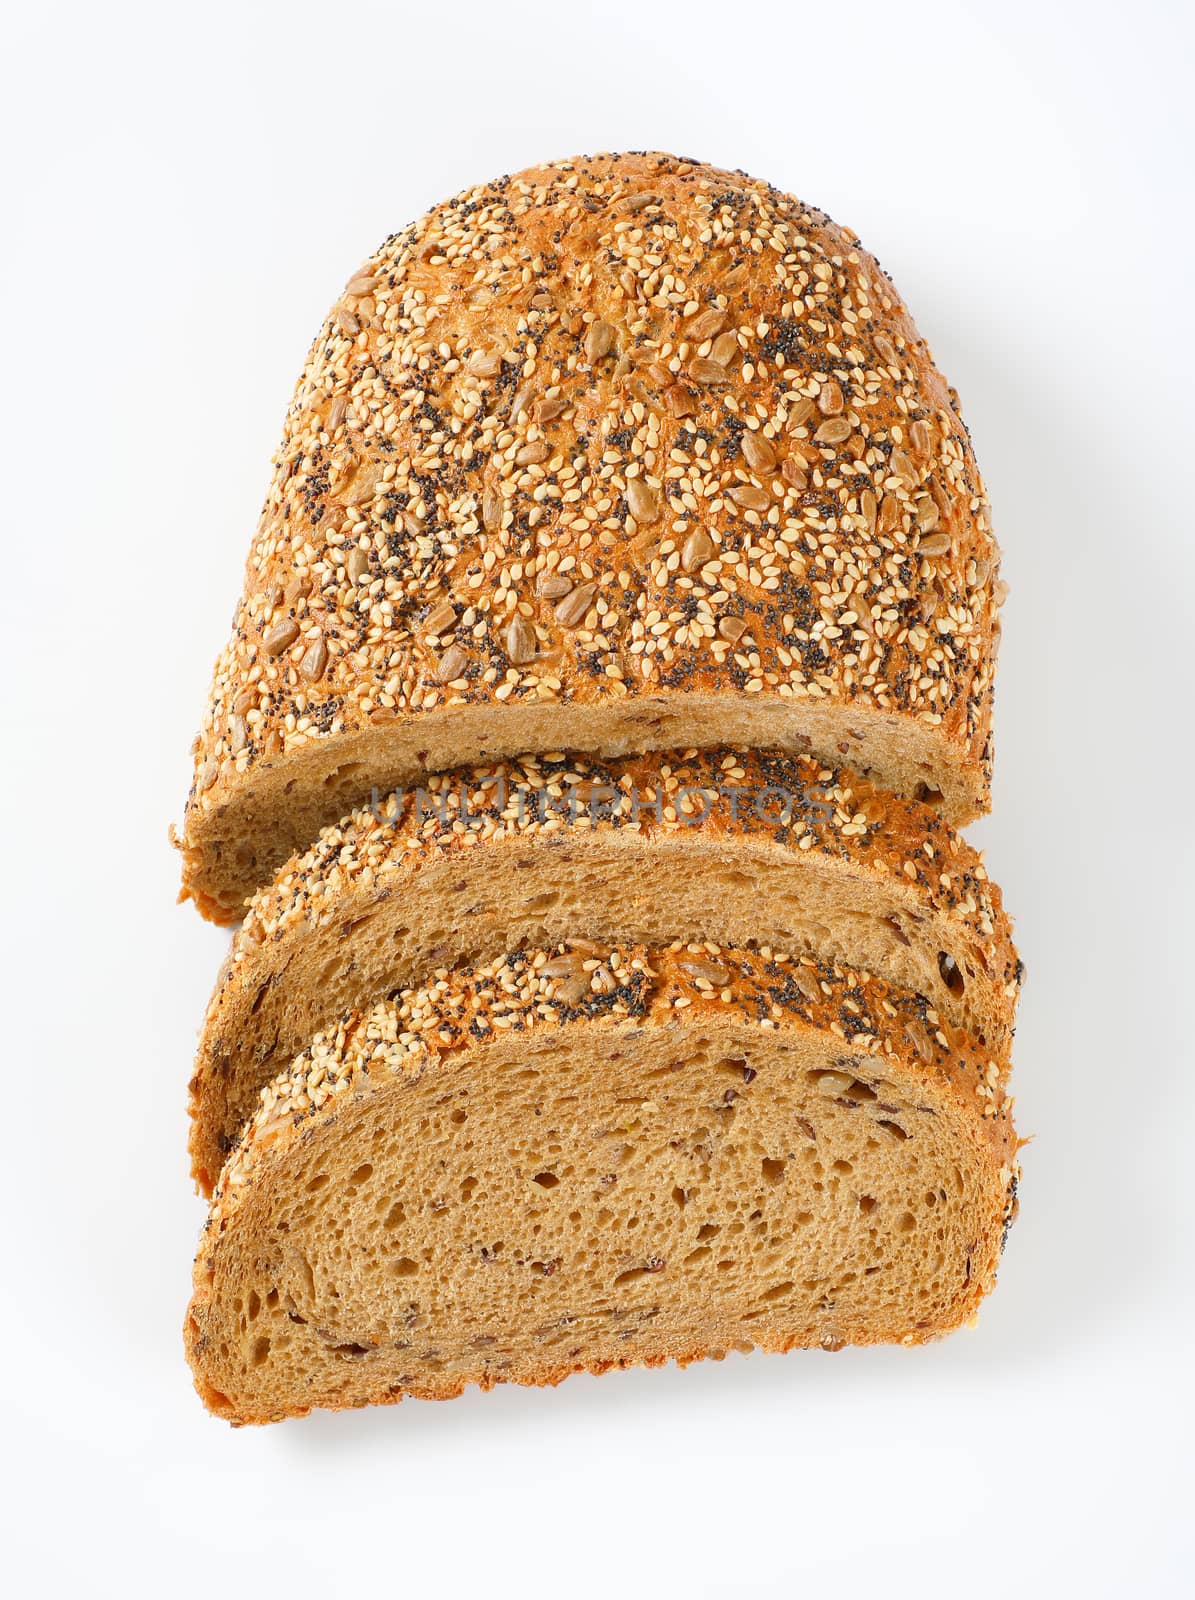 sliced bread with poppy, sunflower and sesame seeds on white background